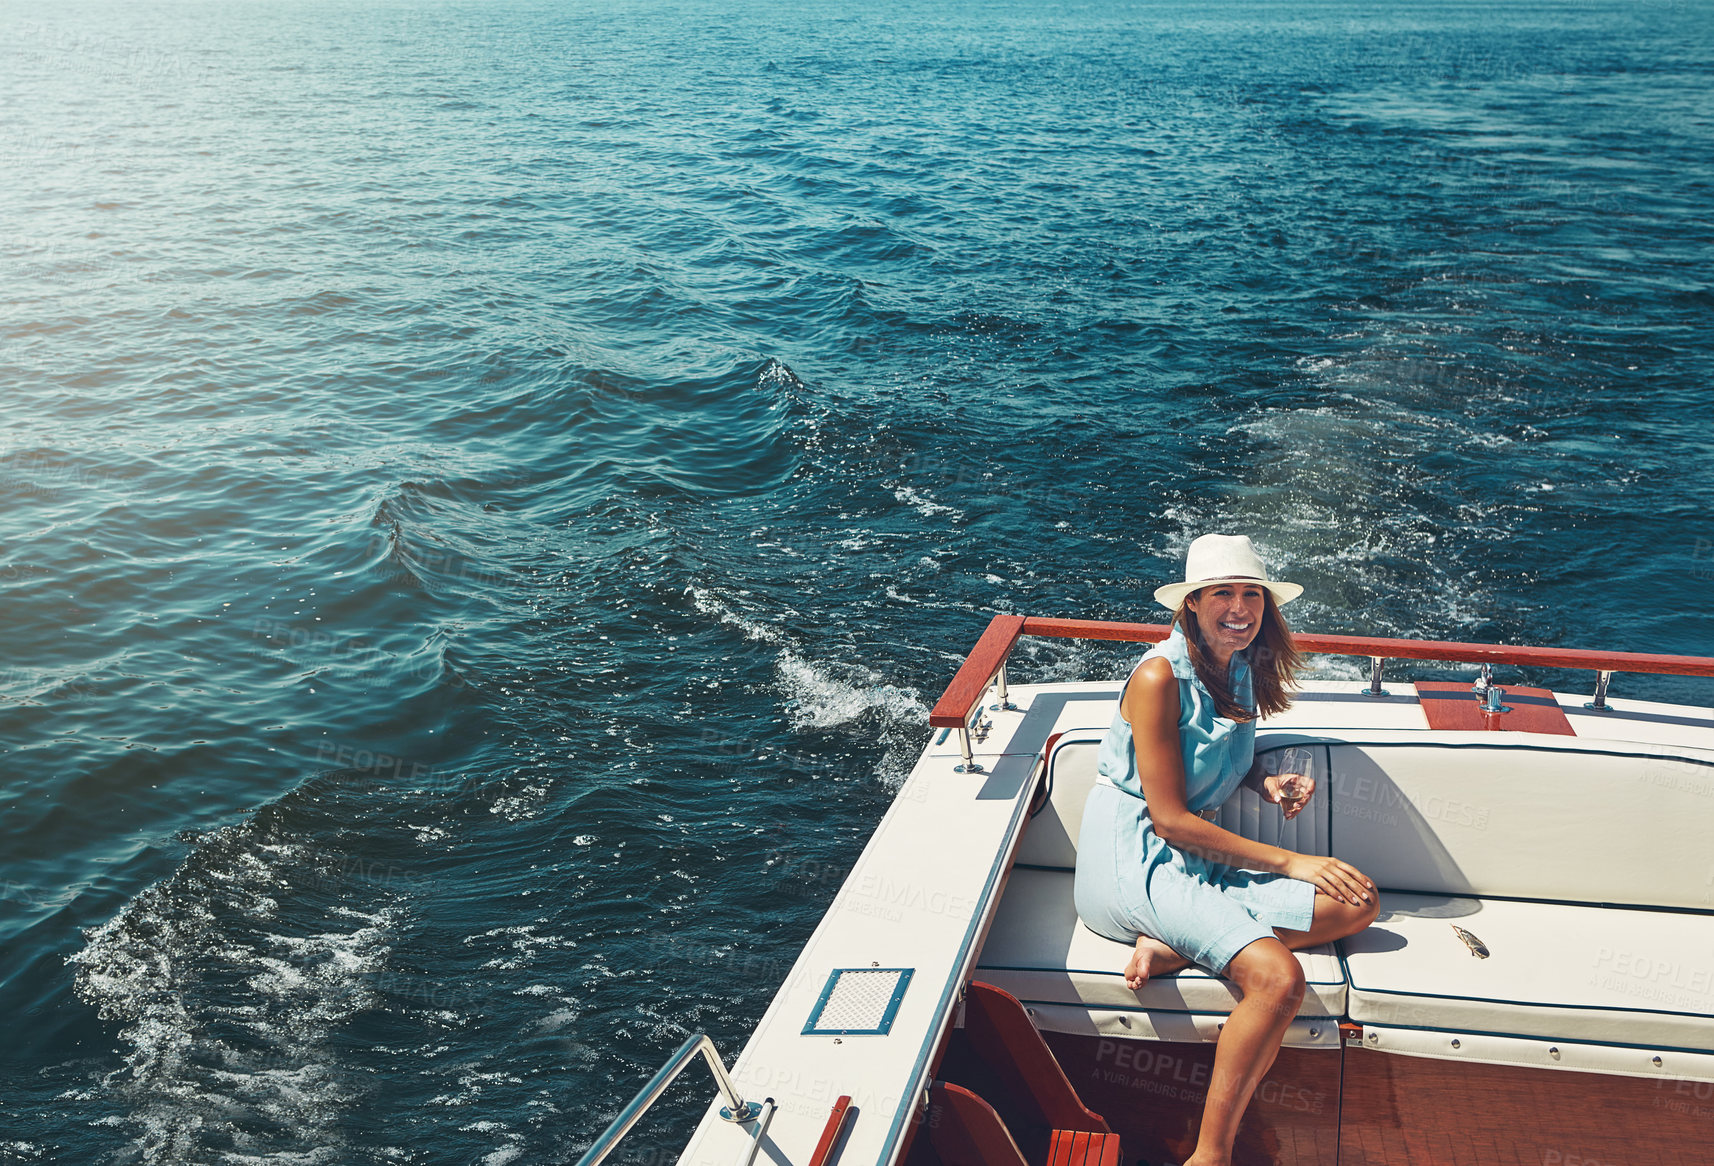 Buy stock photo High angle portrait of an attractive young woman sitting at the back of a yacht on the open seas